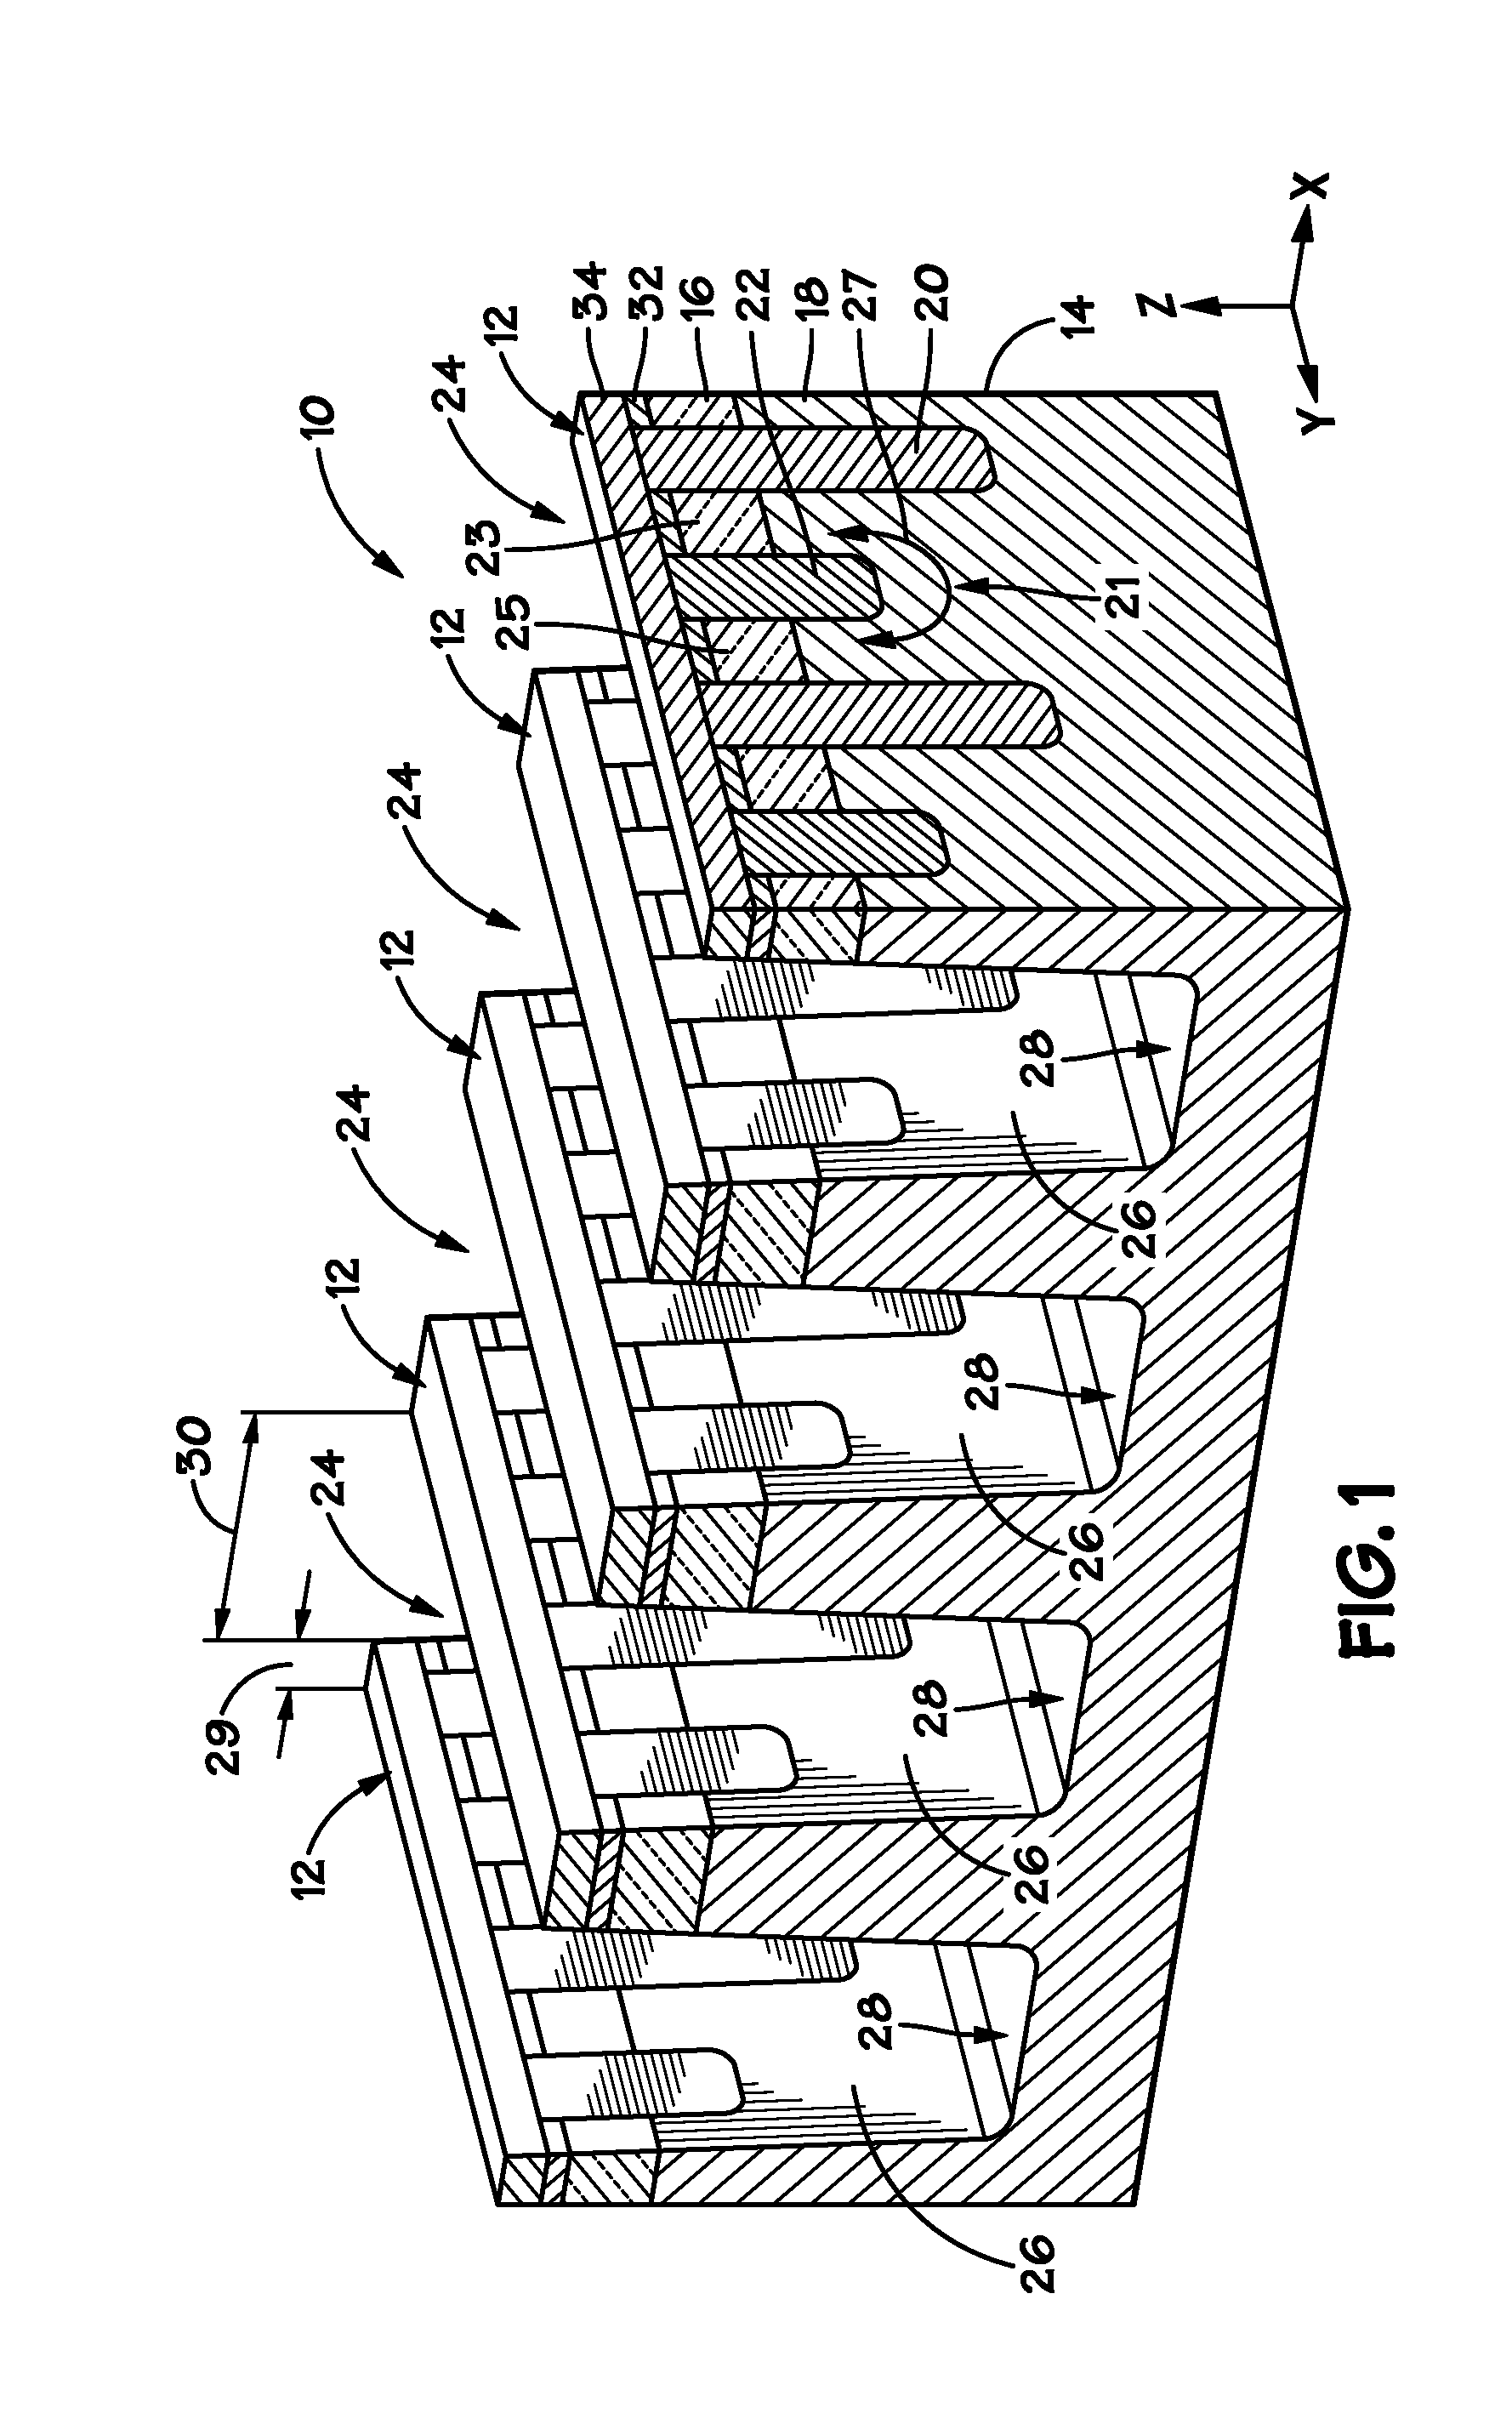 Double gated 4f2 dram chc cell and methods of fabricating the same